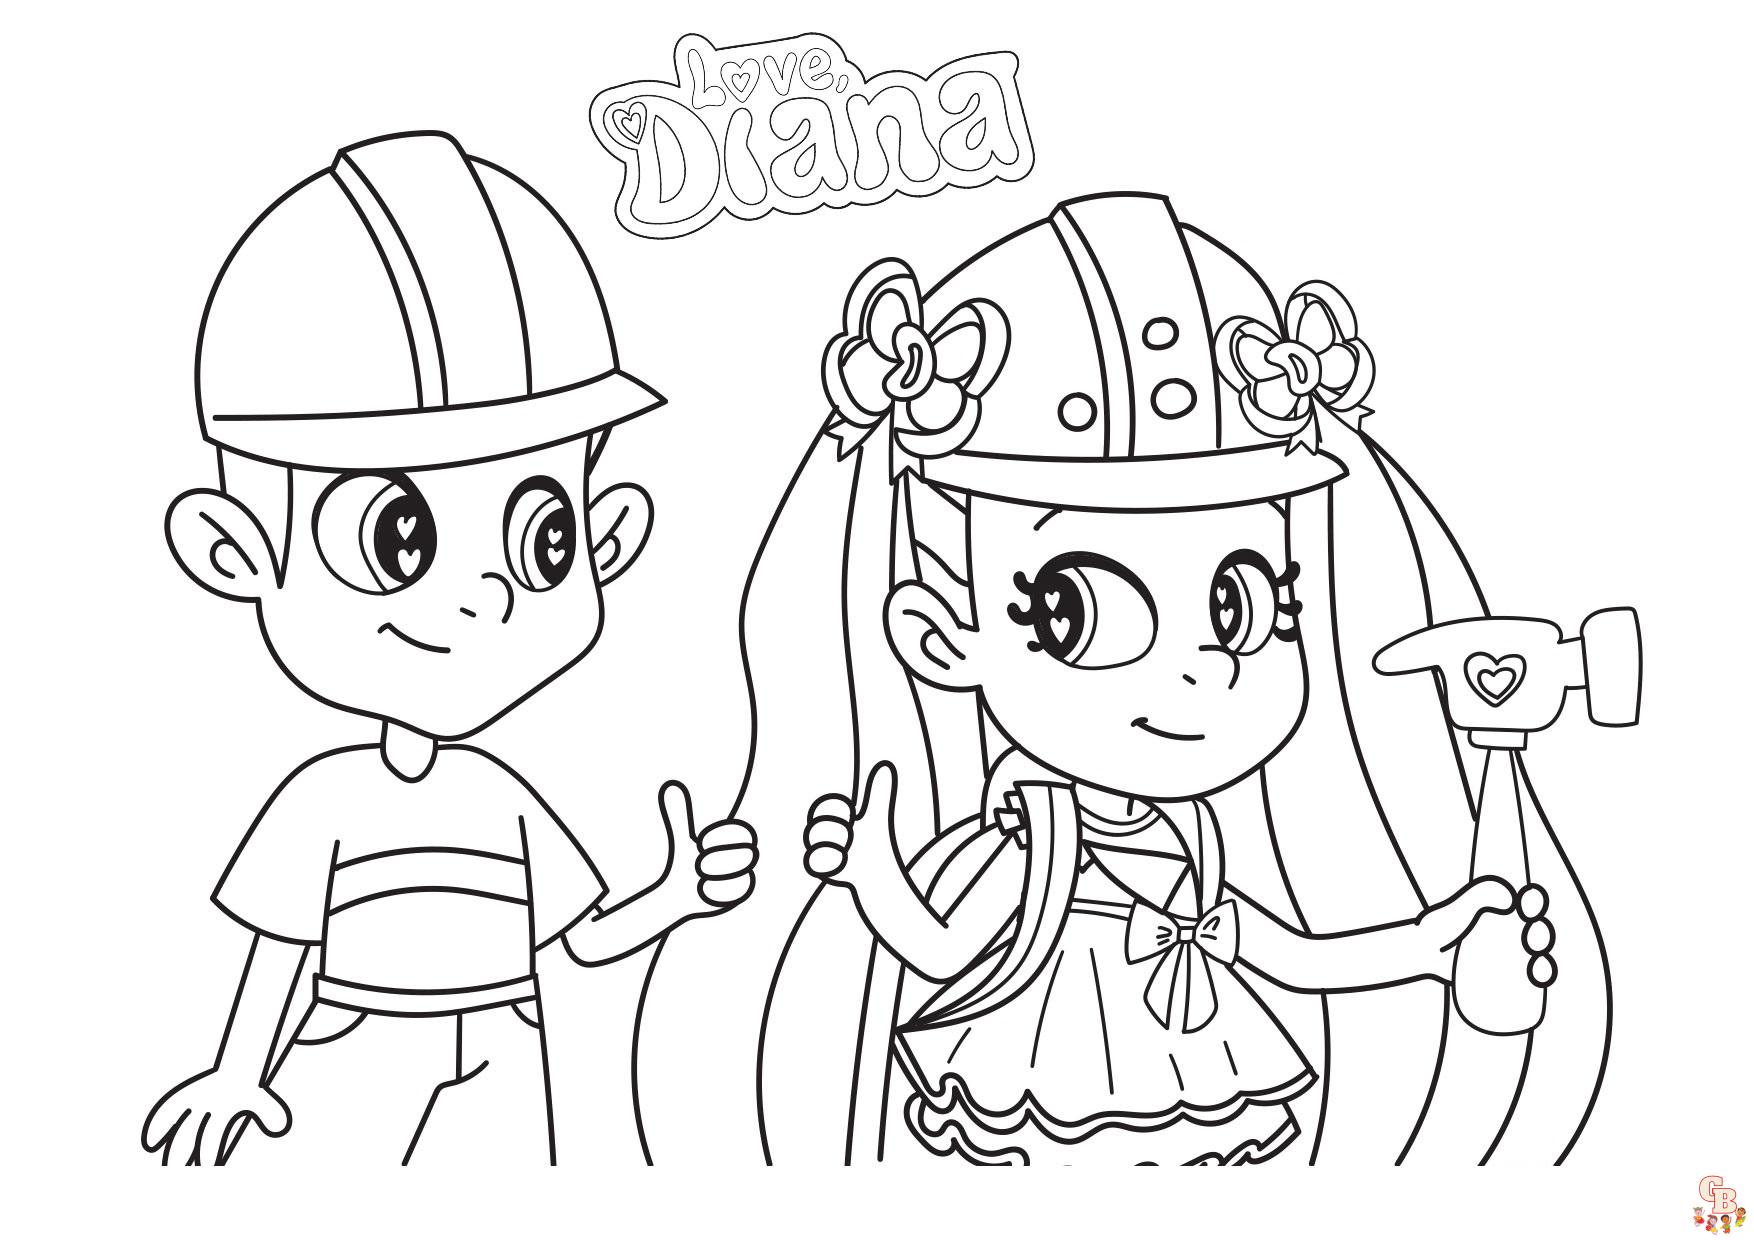 Diana and Roma Coloring Pages 2